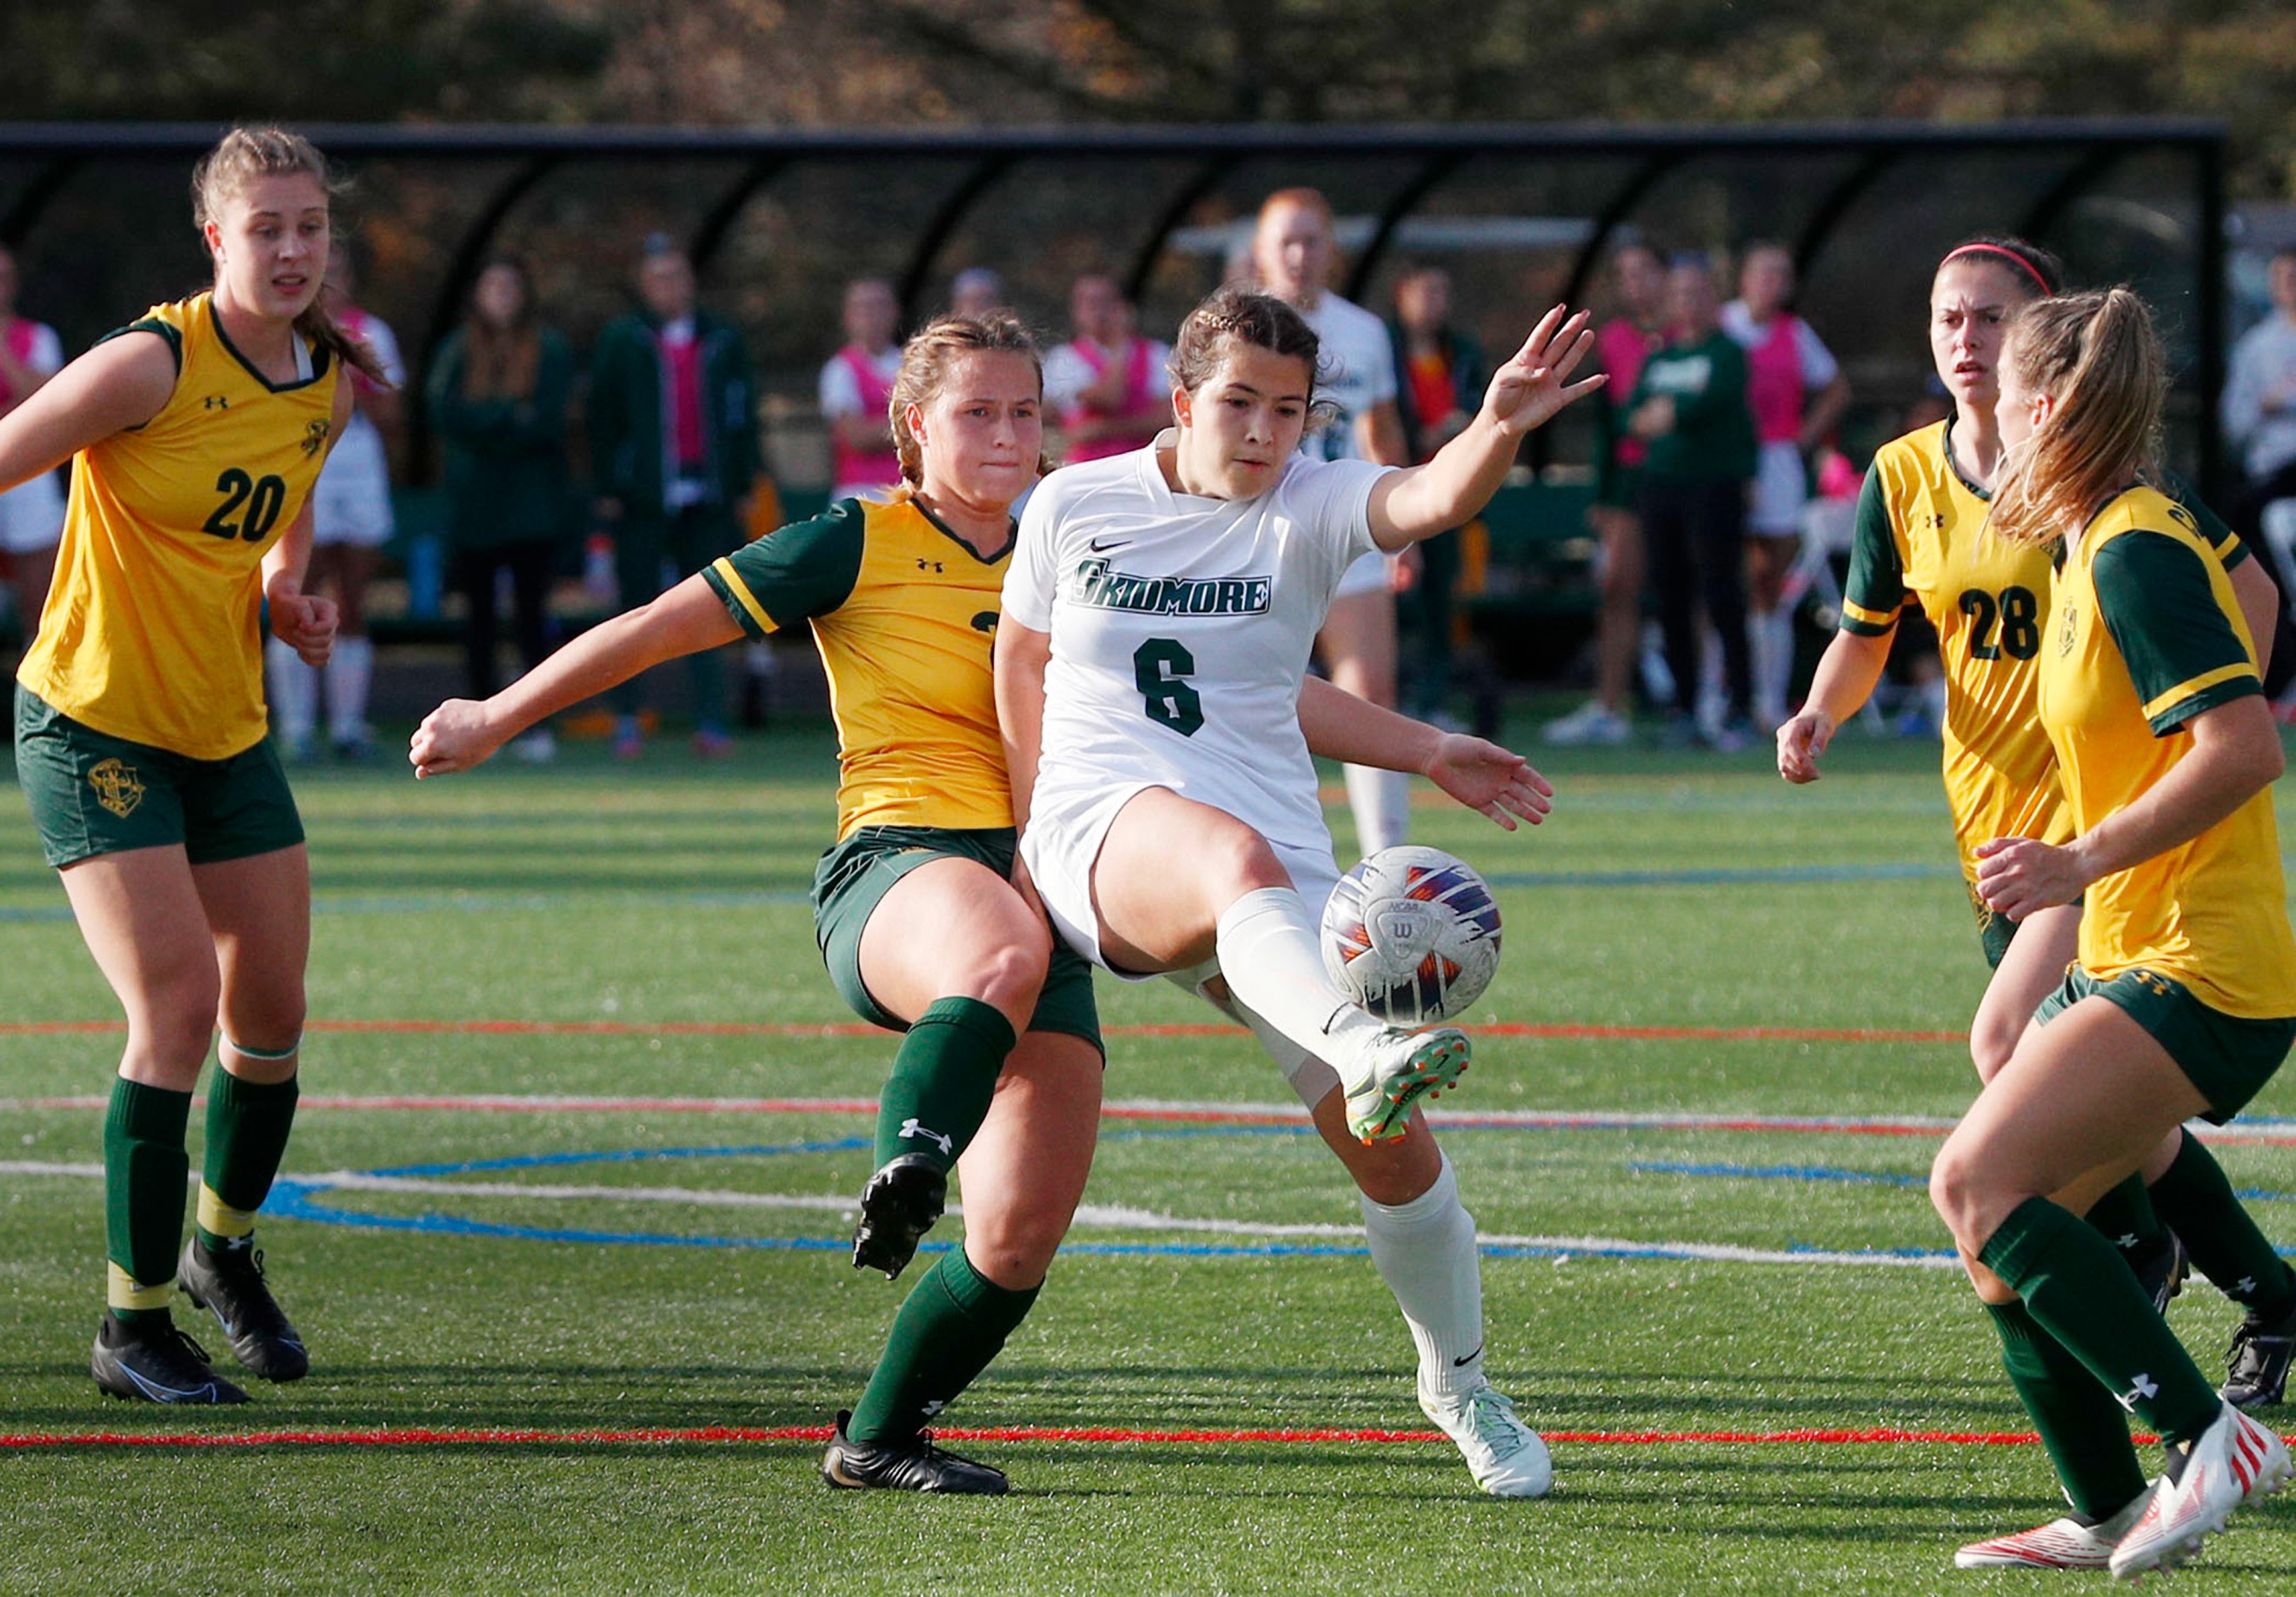 Kat Dunn ’24 rapidly transformed herself from a “super-sub” hoping for game time to Skidmore's first Liberty League Player of the Year in women’s soccer